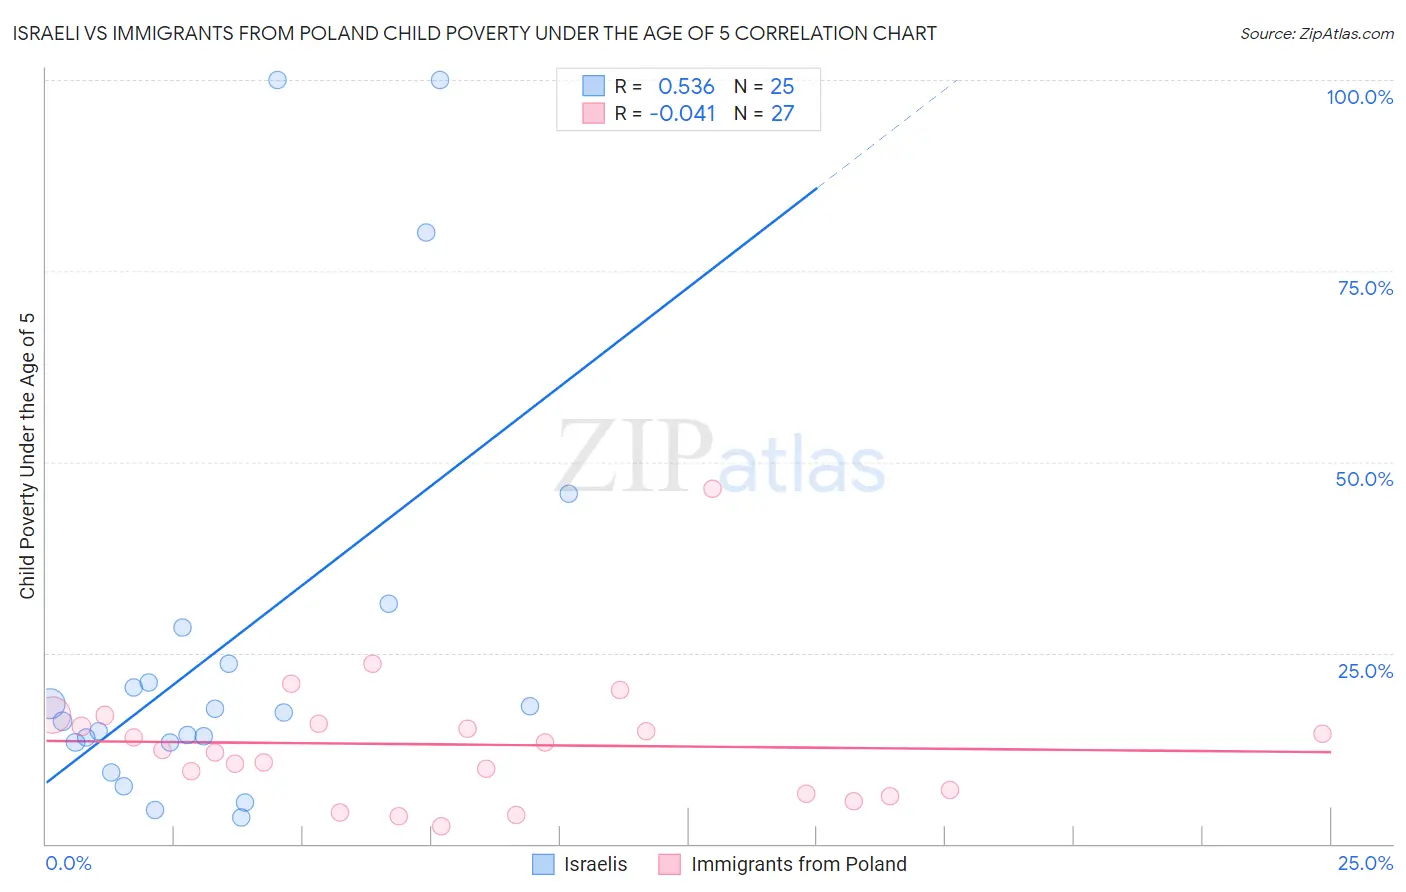 Israeli vs Immigrants from Poland Child Poverty Under the Age of 5